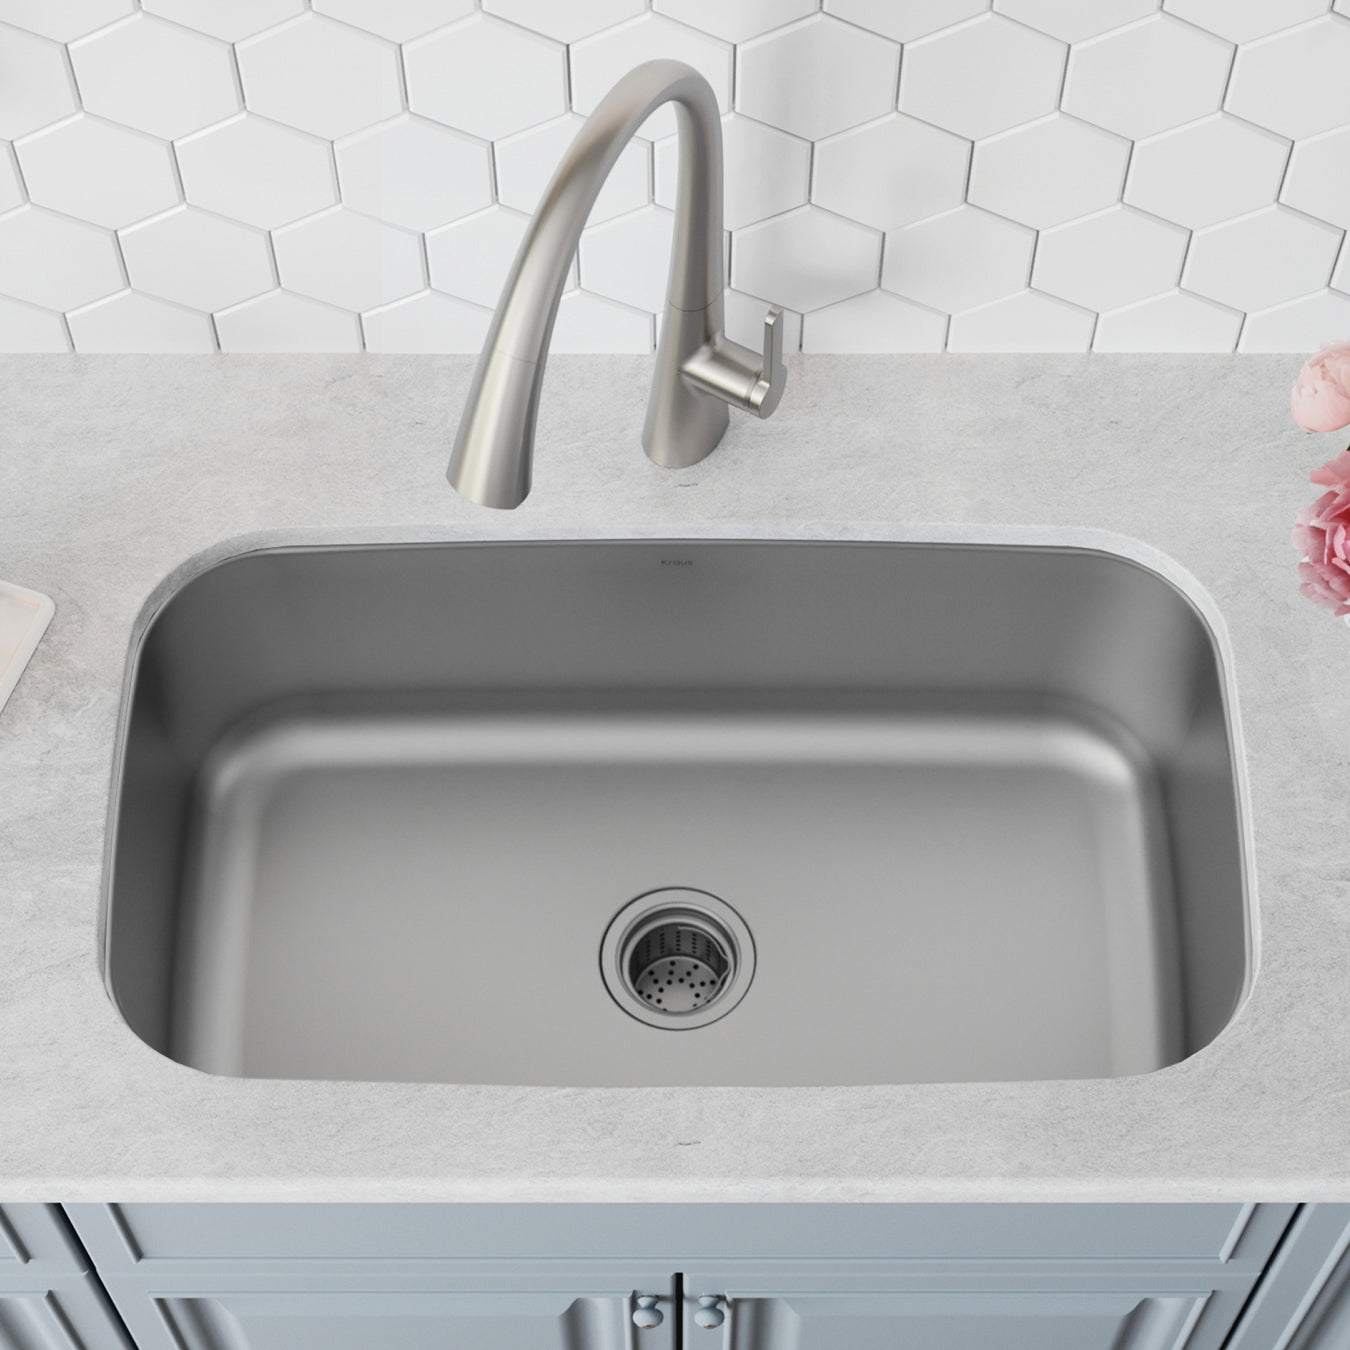 Large selection of kitchen Sinks